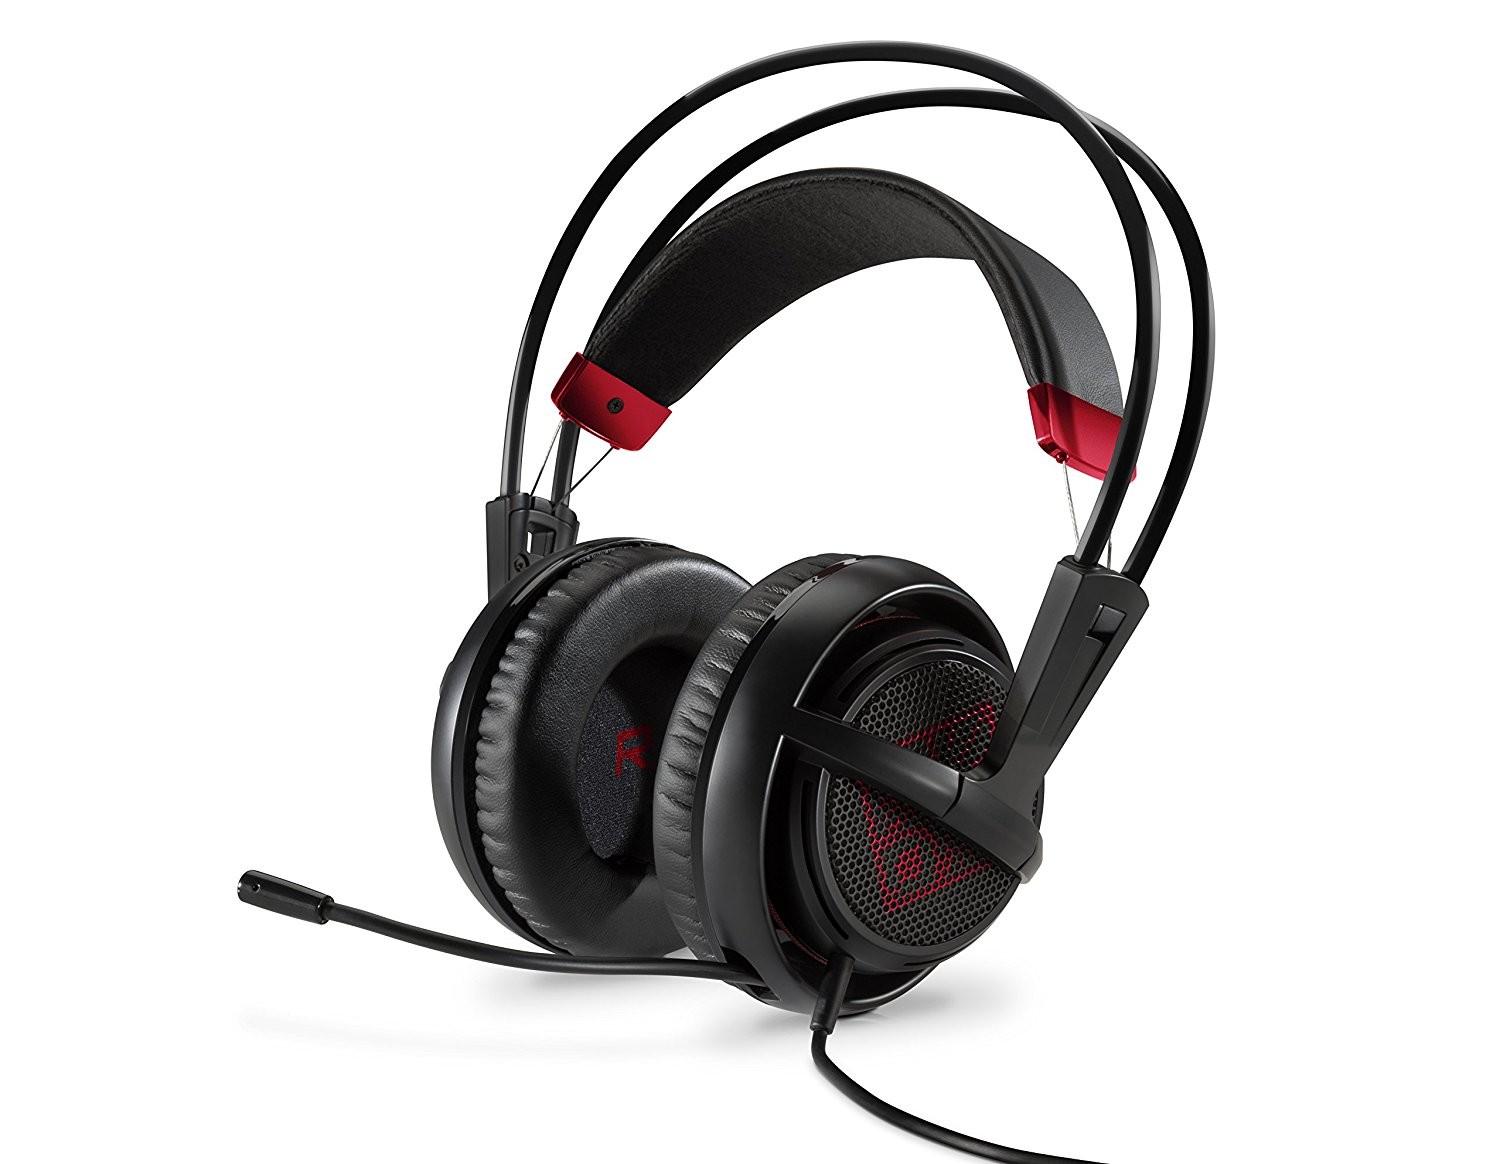 OMEN by HP Headset with SteelSeries